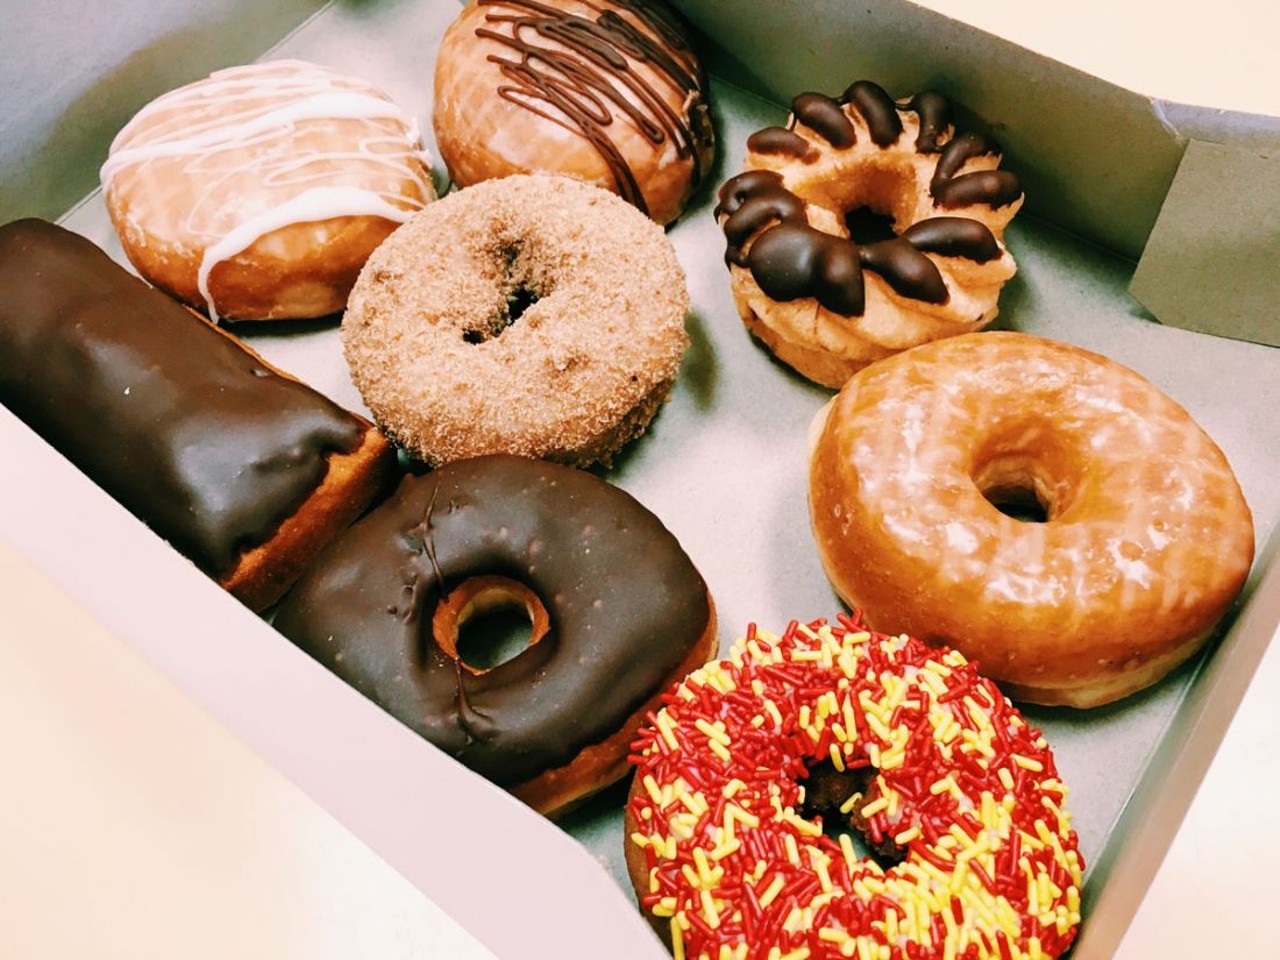 Go to John&#146;s Donuts at 2 a.m.
Because donuts are even more amazing in the middle of the night. And these donuts are at their freshest while the rest of the city sleeps. Photo by Brittani Schlager.